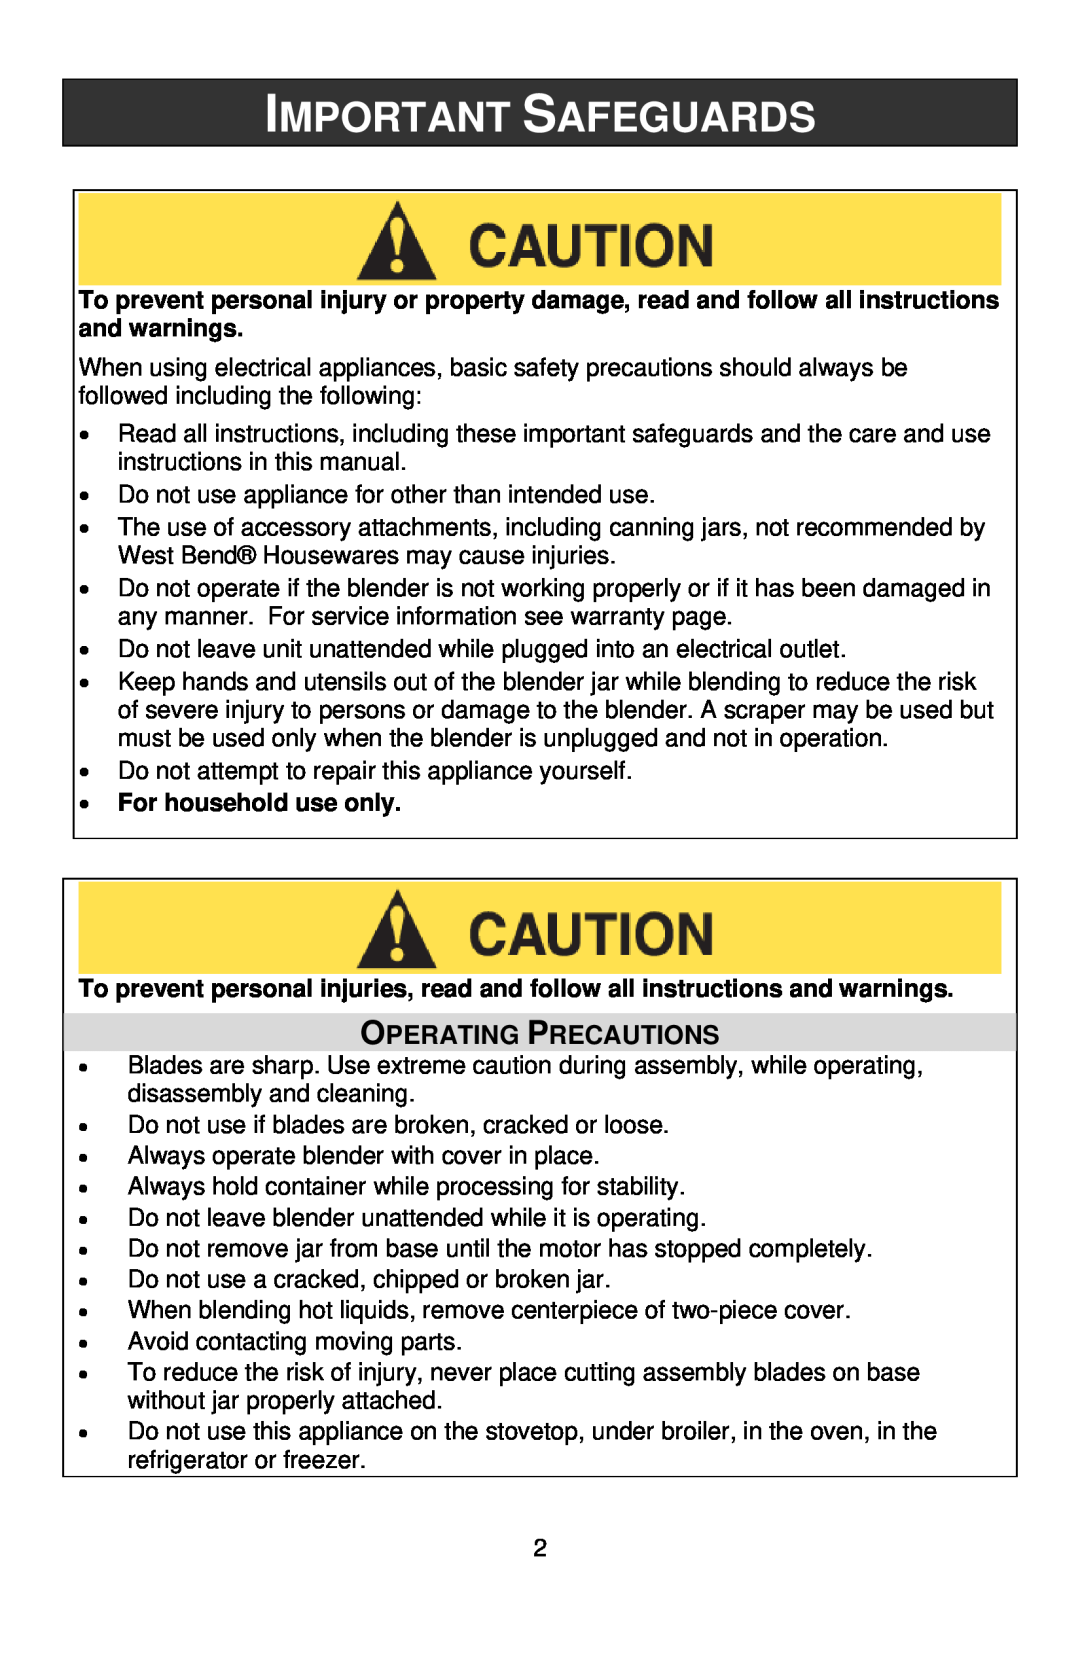 West Bend Blender instruction manual Operating Precautions, For household use only, Important Safeguards 